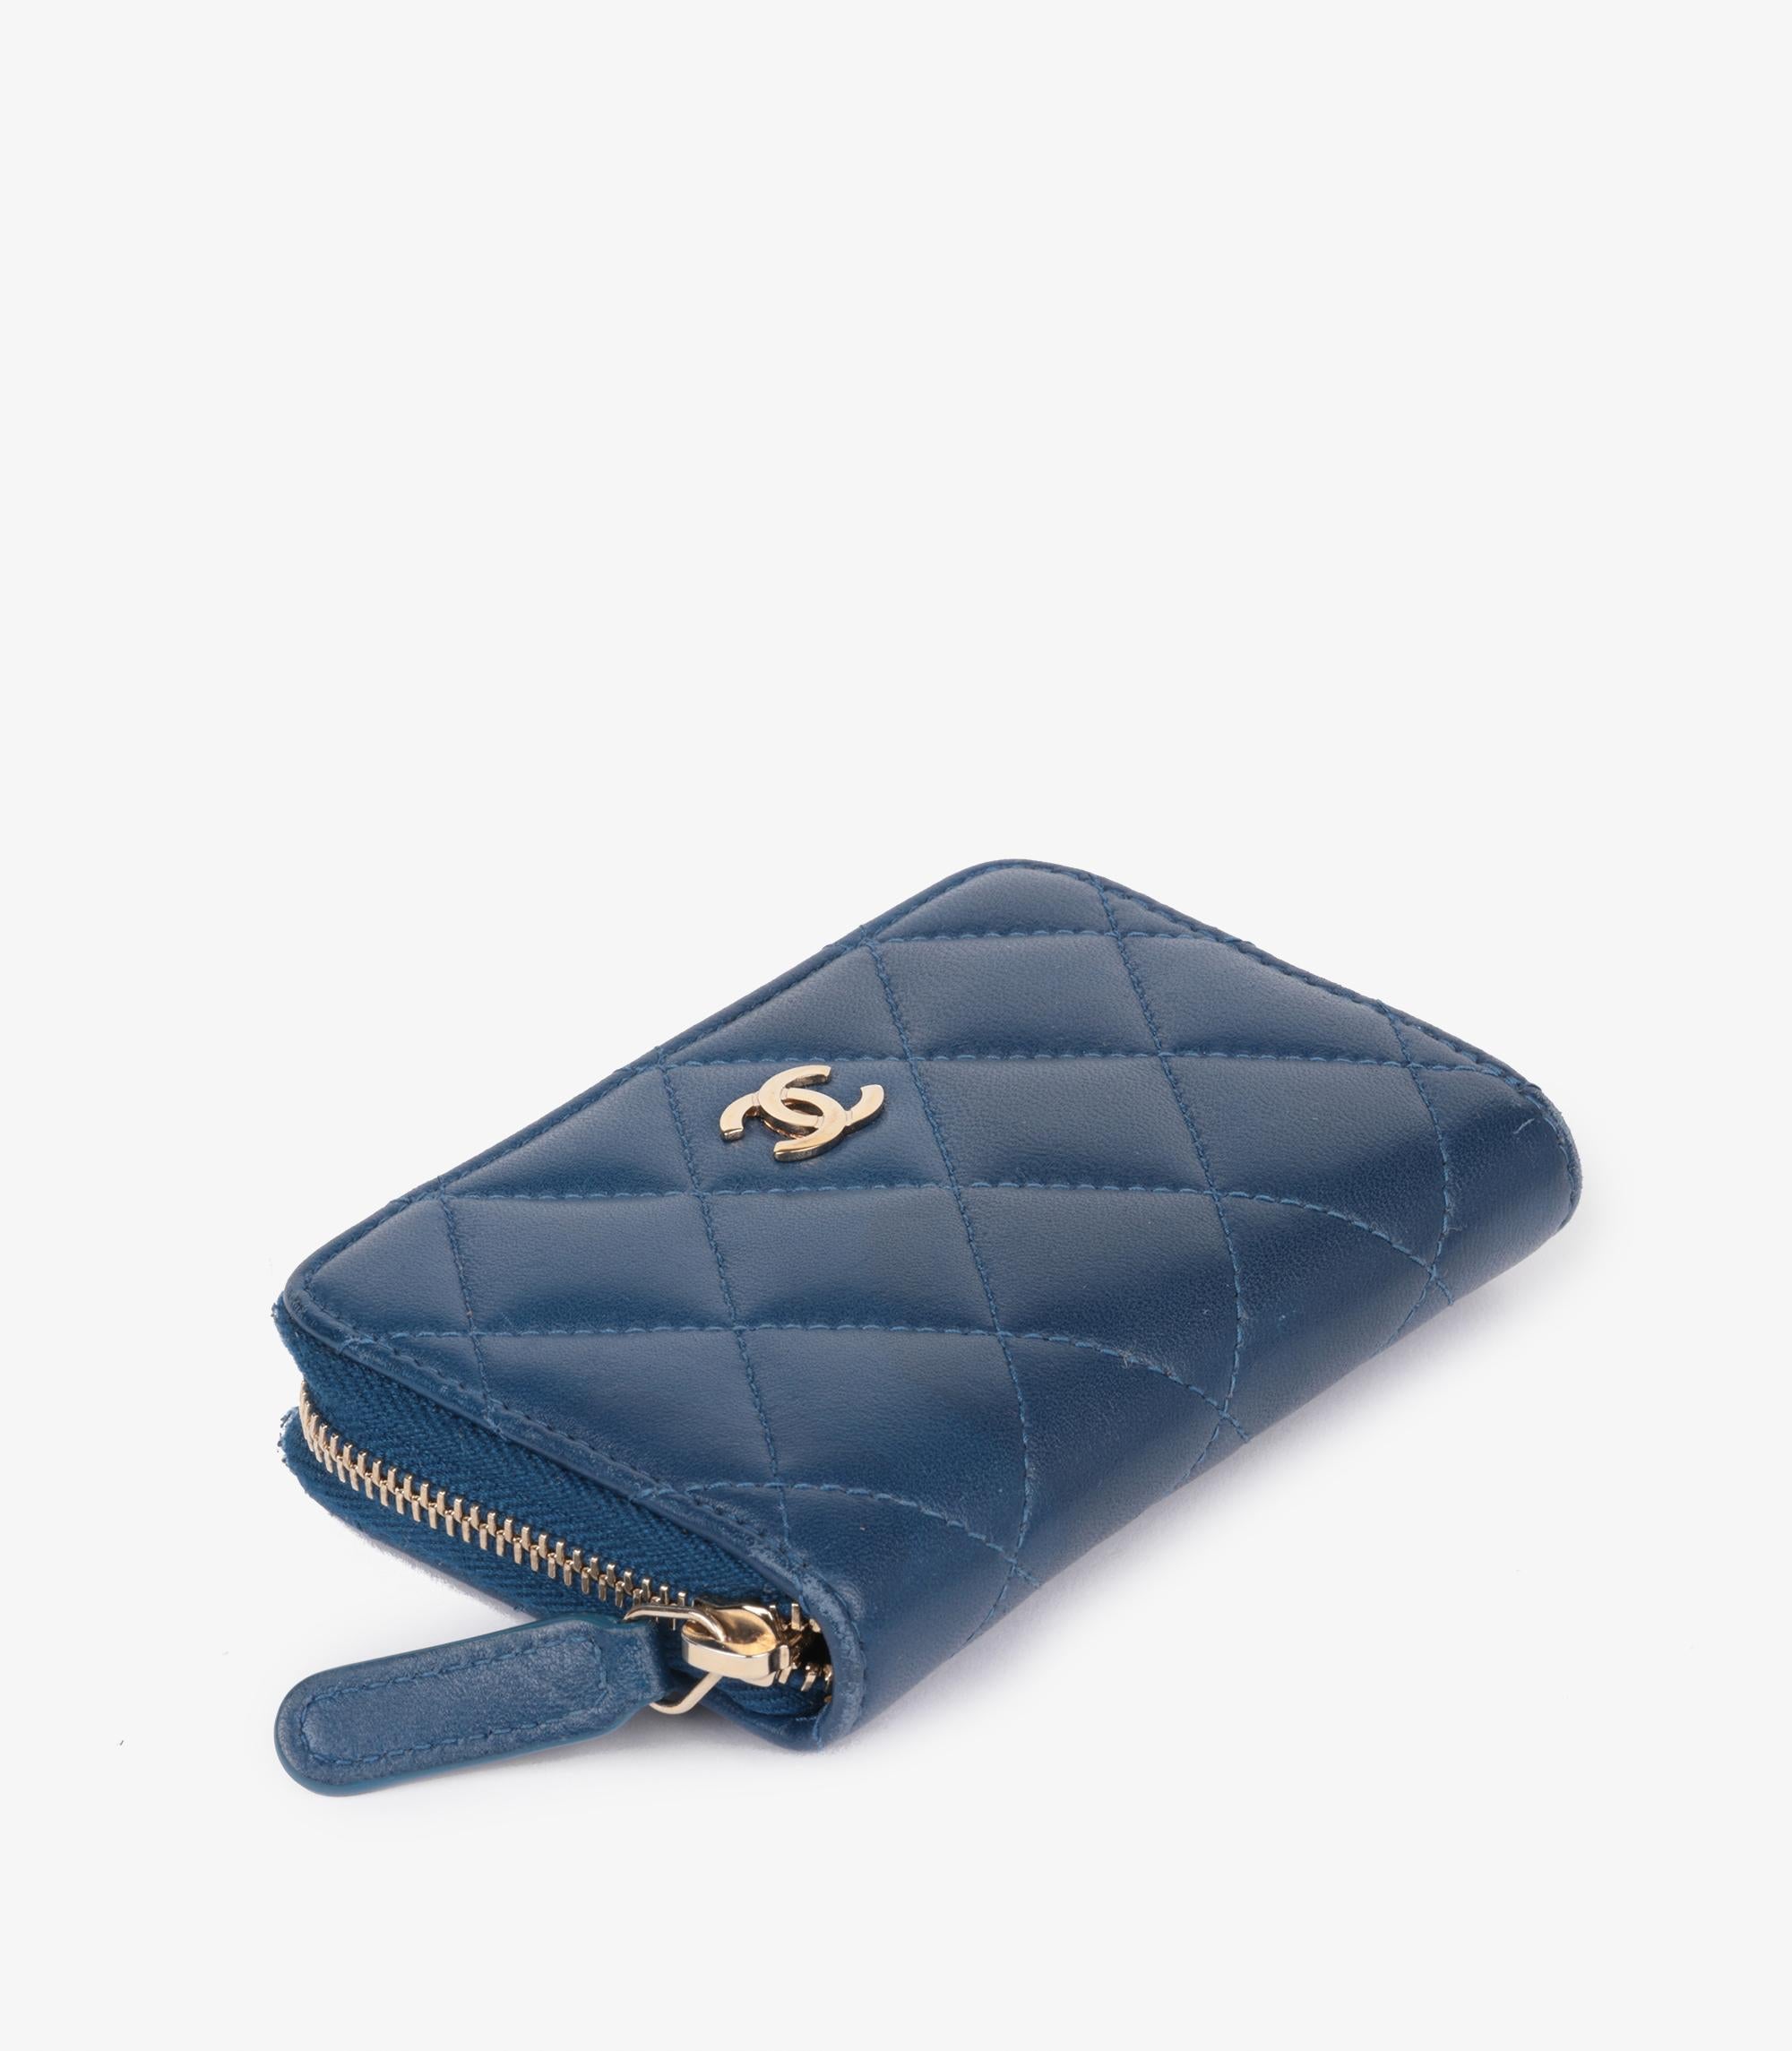 Chanel Blue Quilted Lambskin Leather Zip Around Cardholder

Brand- Chanel
Model- Quilted Lambskin Zip Around Cardholder
Product Type- Cardholder
Serial Number- 25******
Age- Circa 2018
Accompanied By- Chanel Box, Dust Bag, Authenticity Card
Colour-